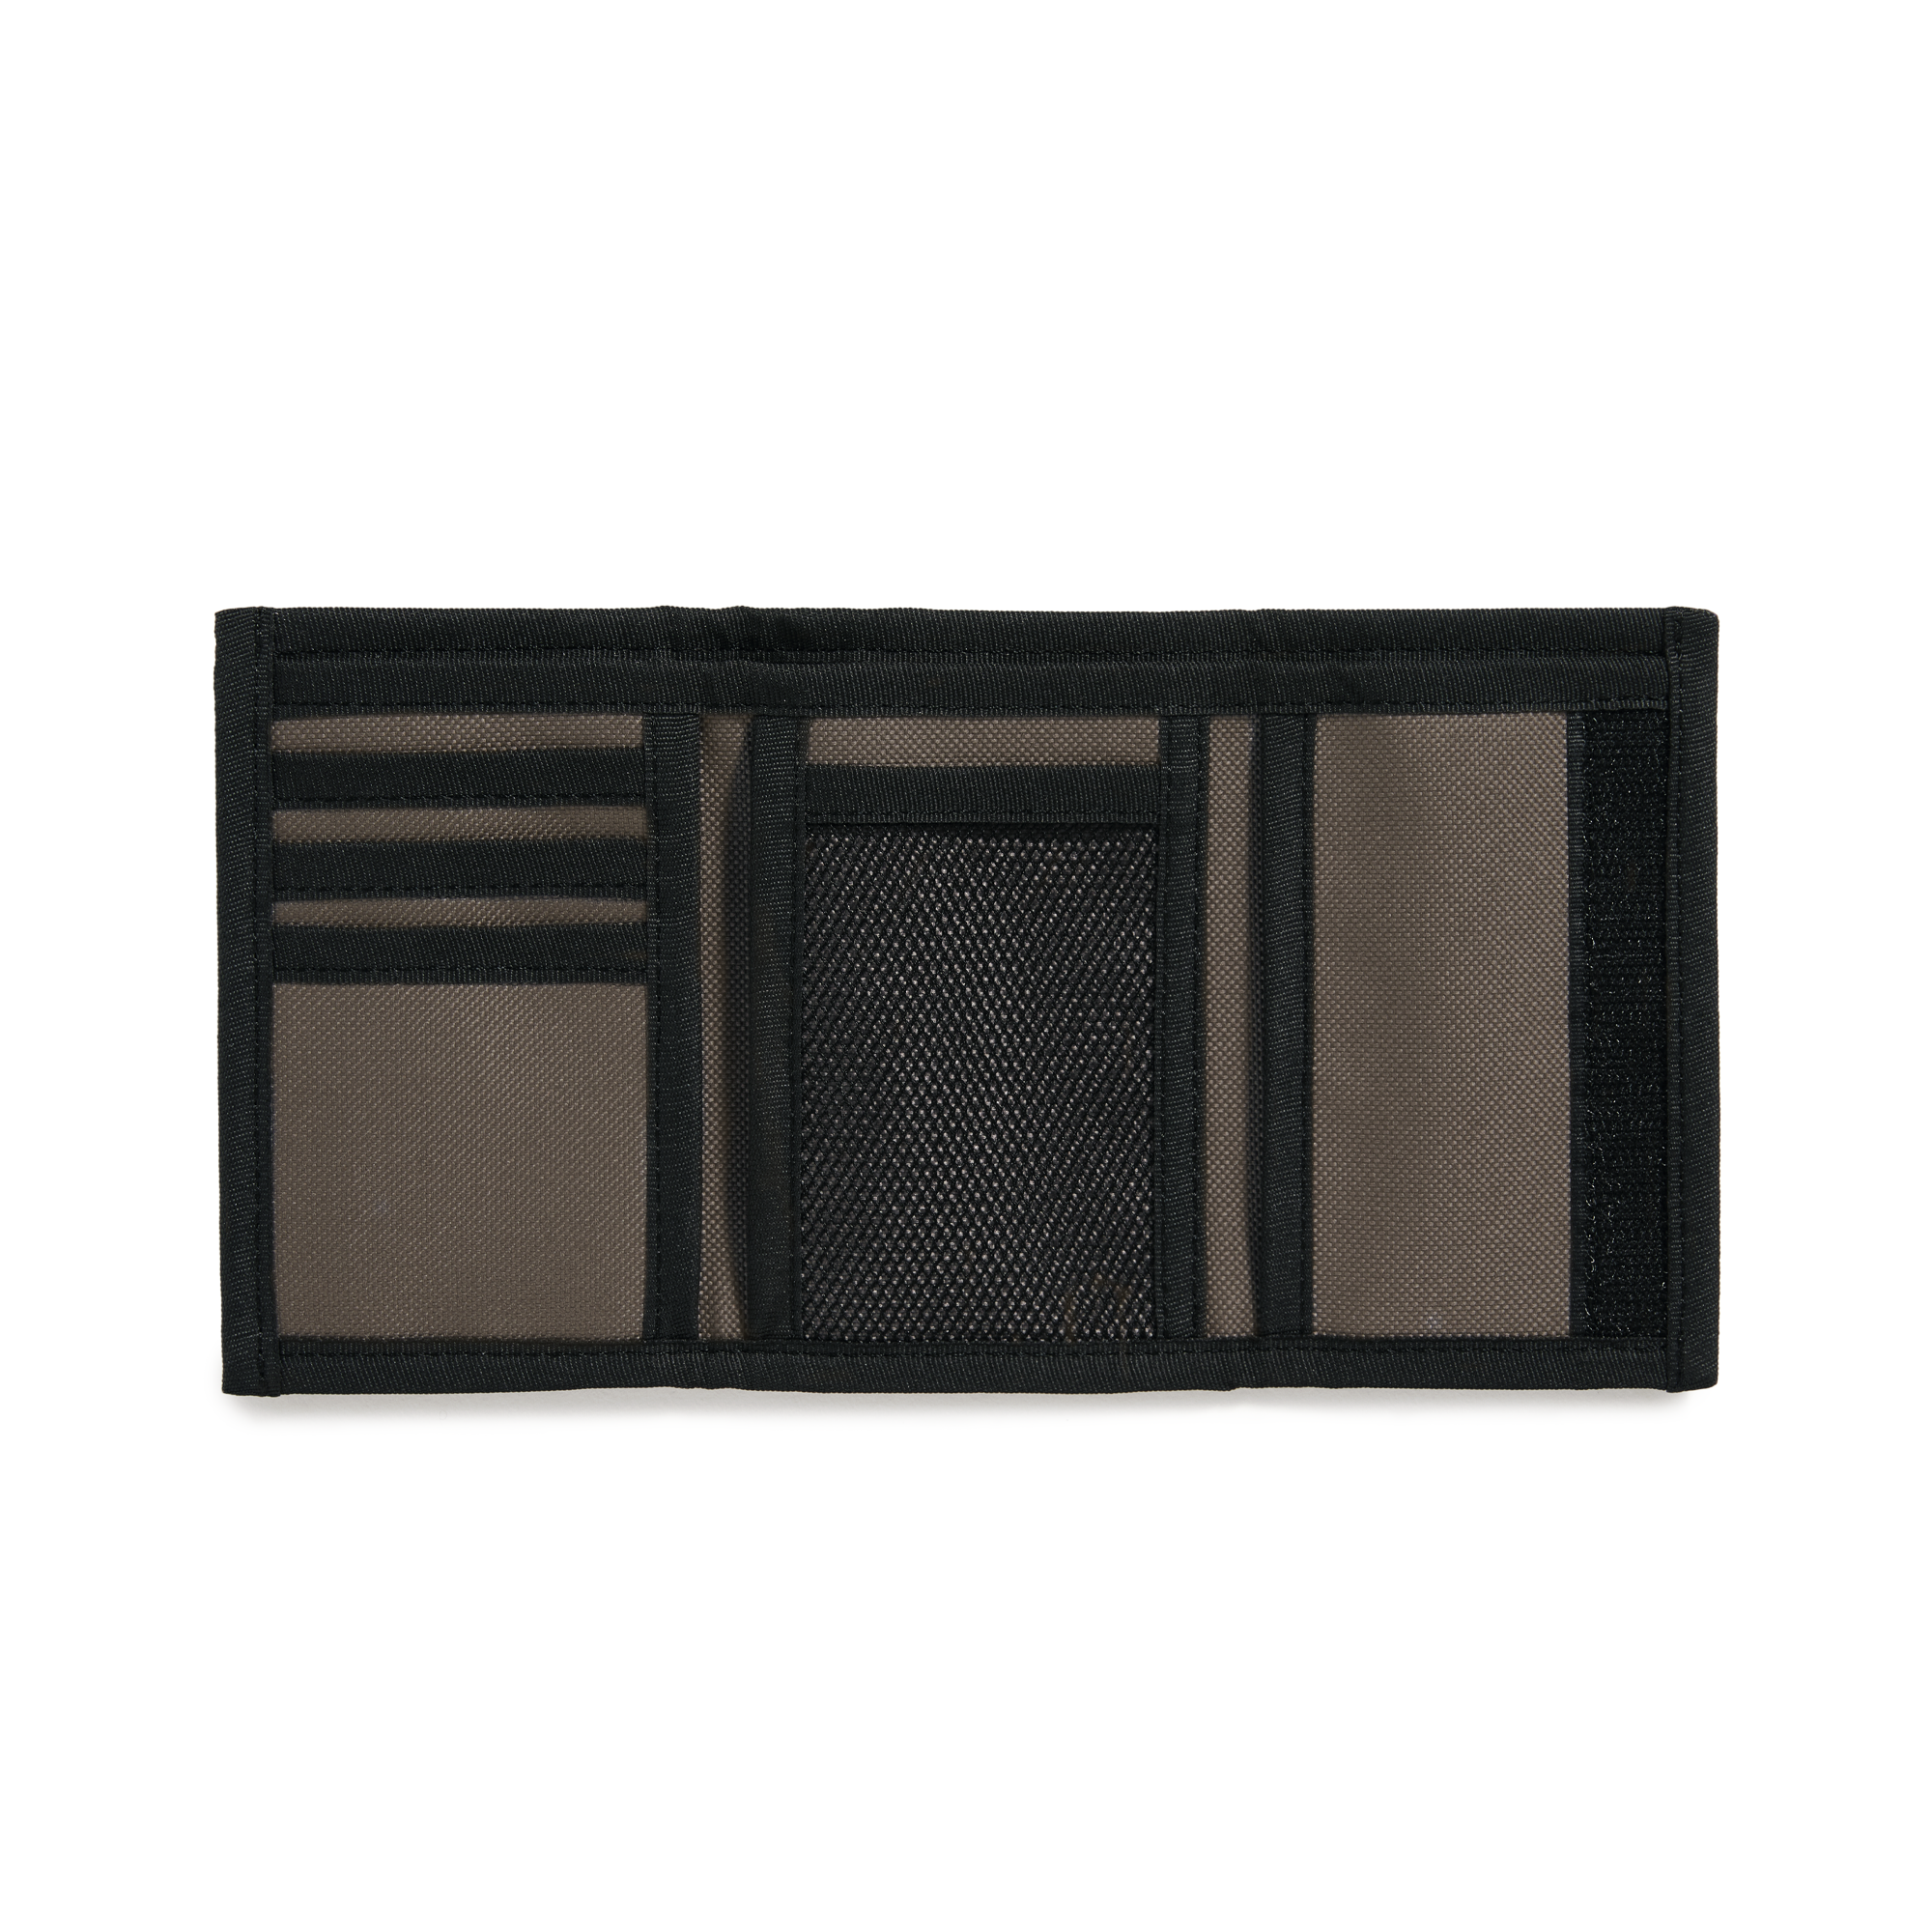 Grey polar velcro wallet with khaki logo on front. Card and cash pockets inside. Free uk shipping on orders over £50